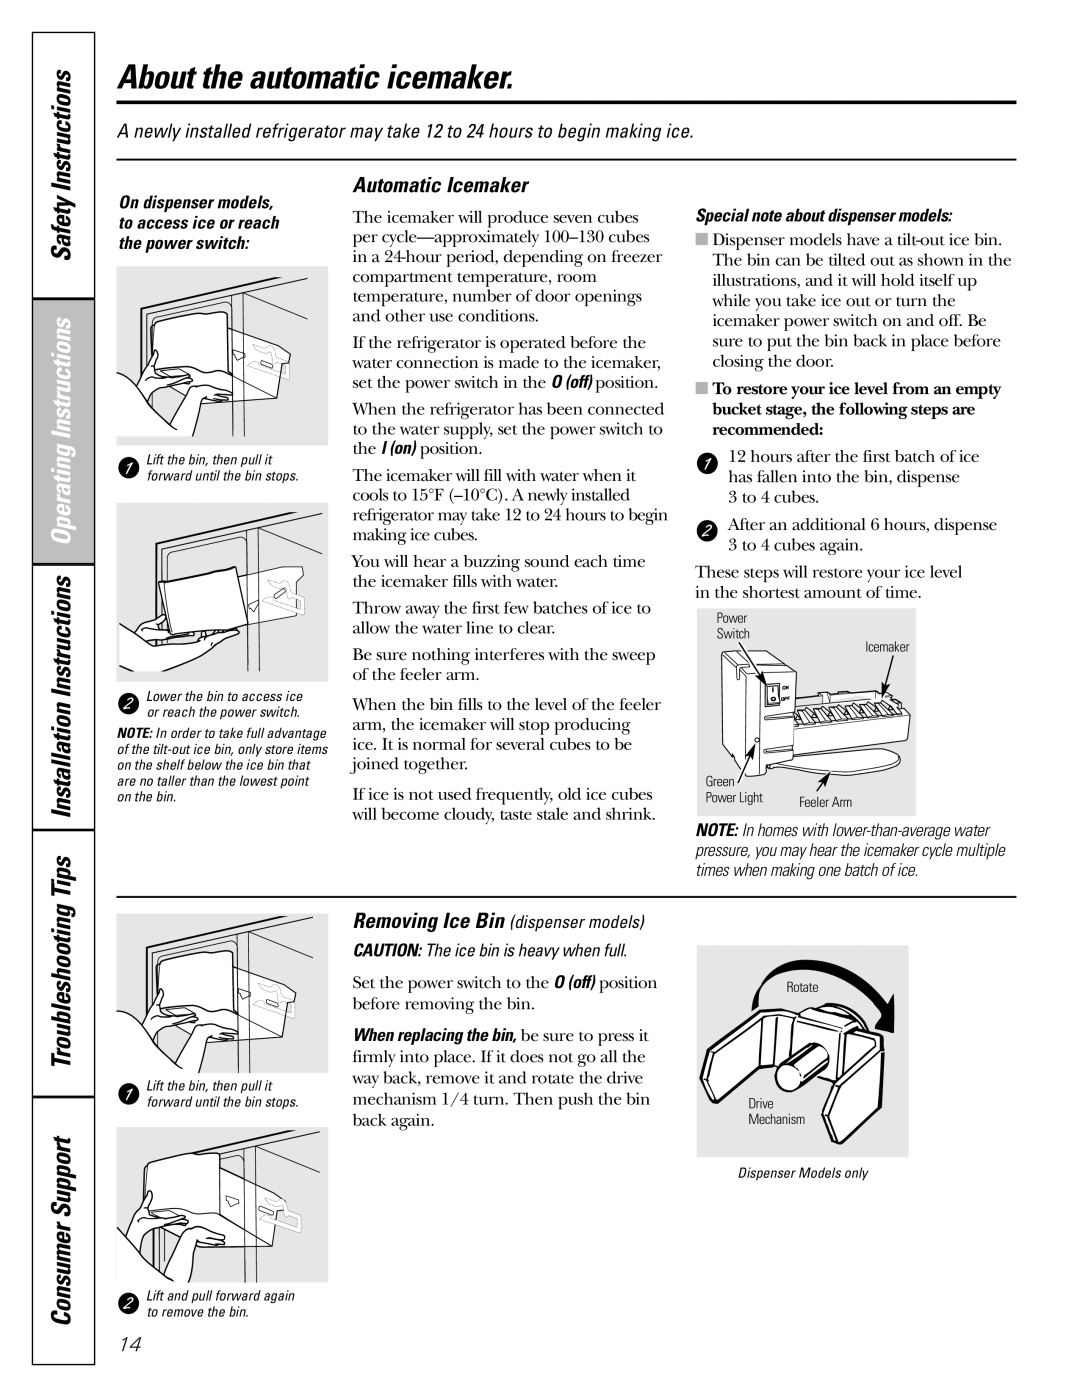 GE 200D8074P017 About the automatic icemaker, Tips Installation Instructions Operating Instructions Safety 